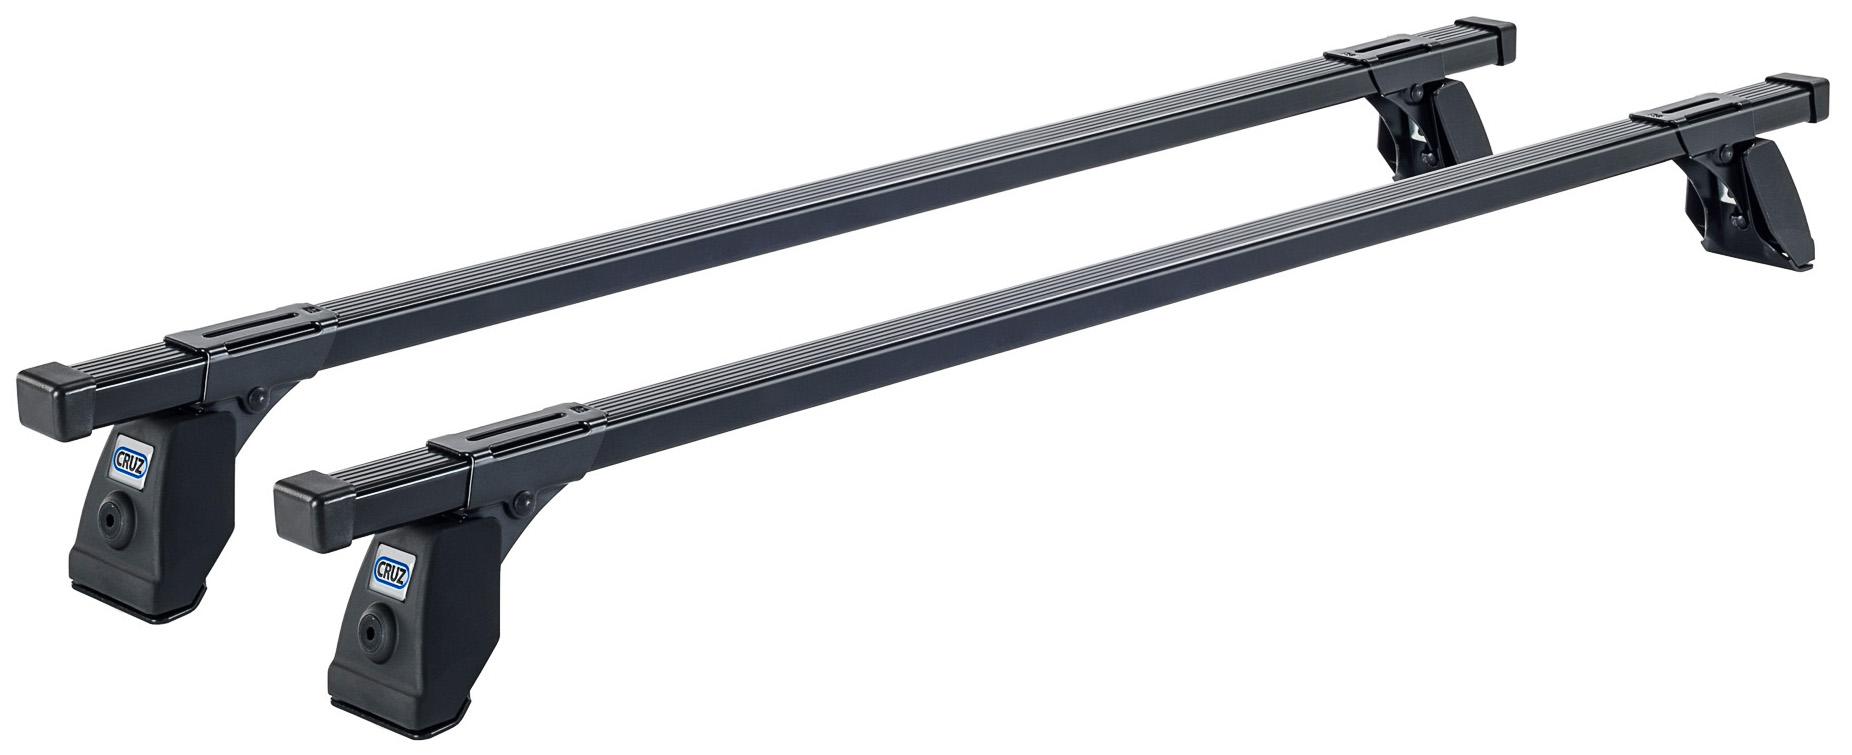 Cruz Commercial Roof Bars 30 X 20 922-418 - Pack Of 2